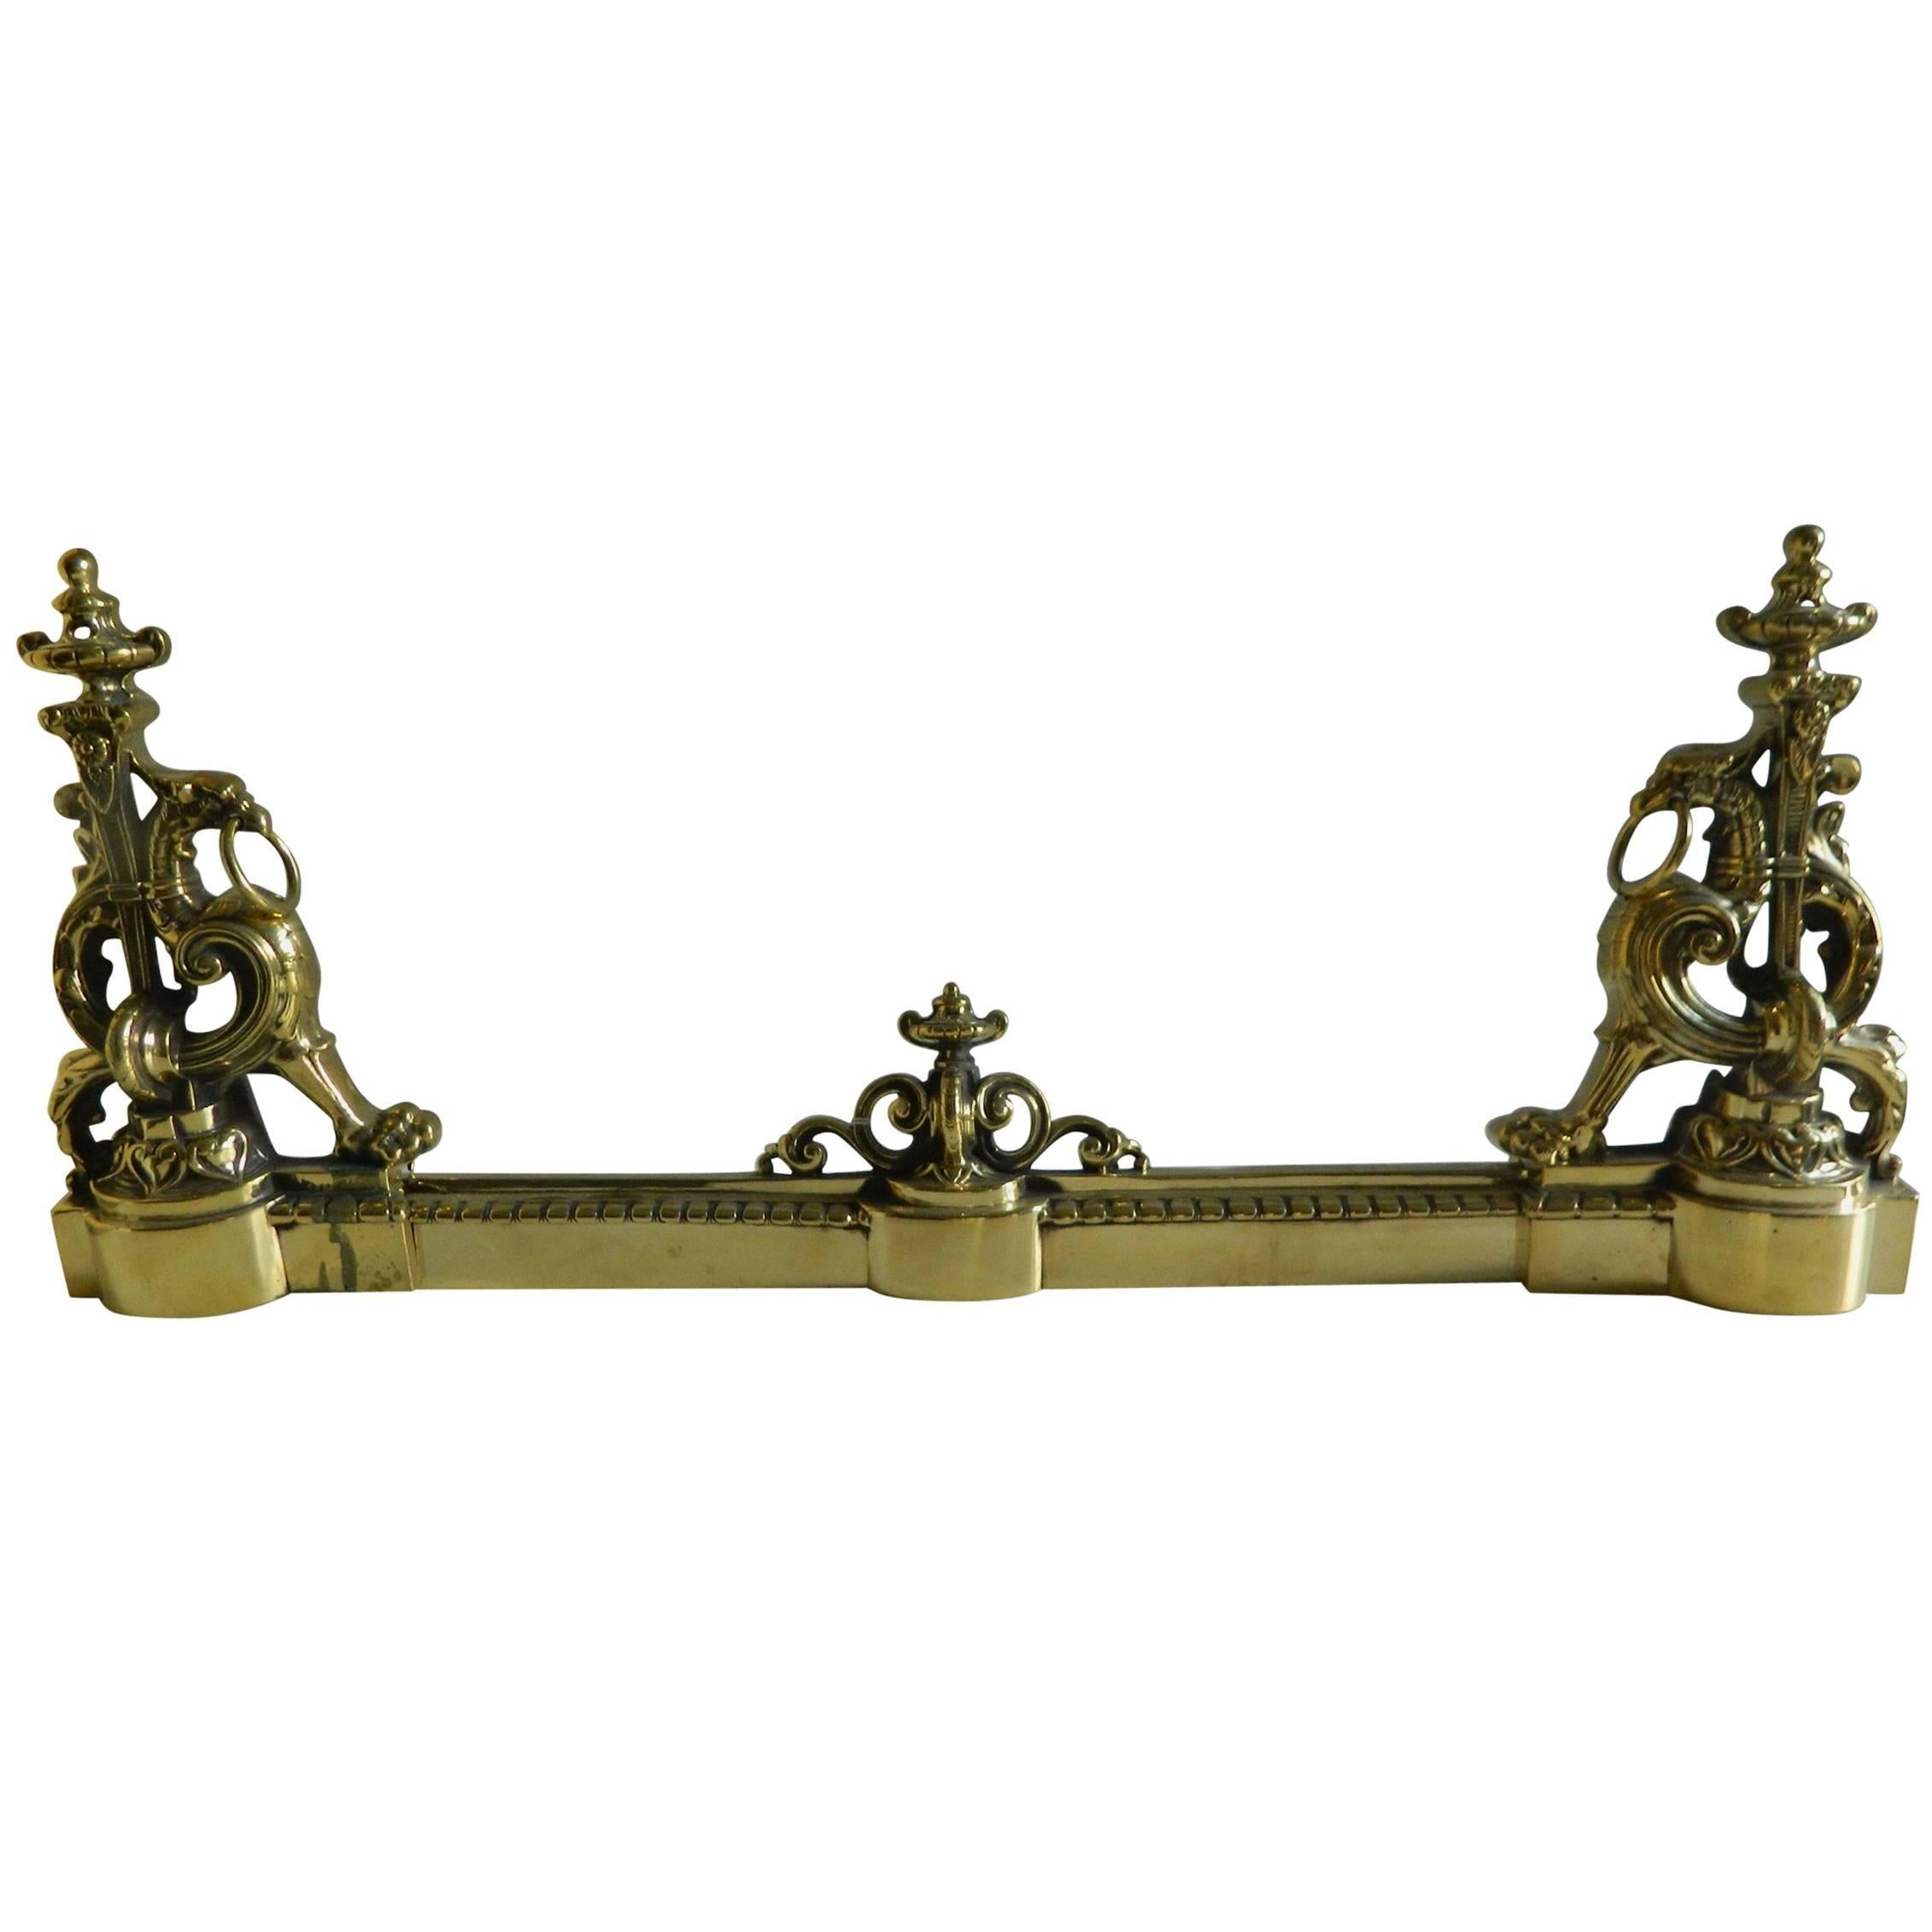 Pair of Brass Chenets or Andirons with Fender, Dragon Motif, 19th Century